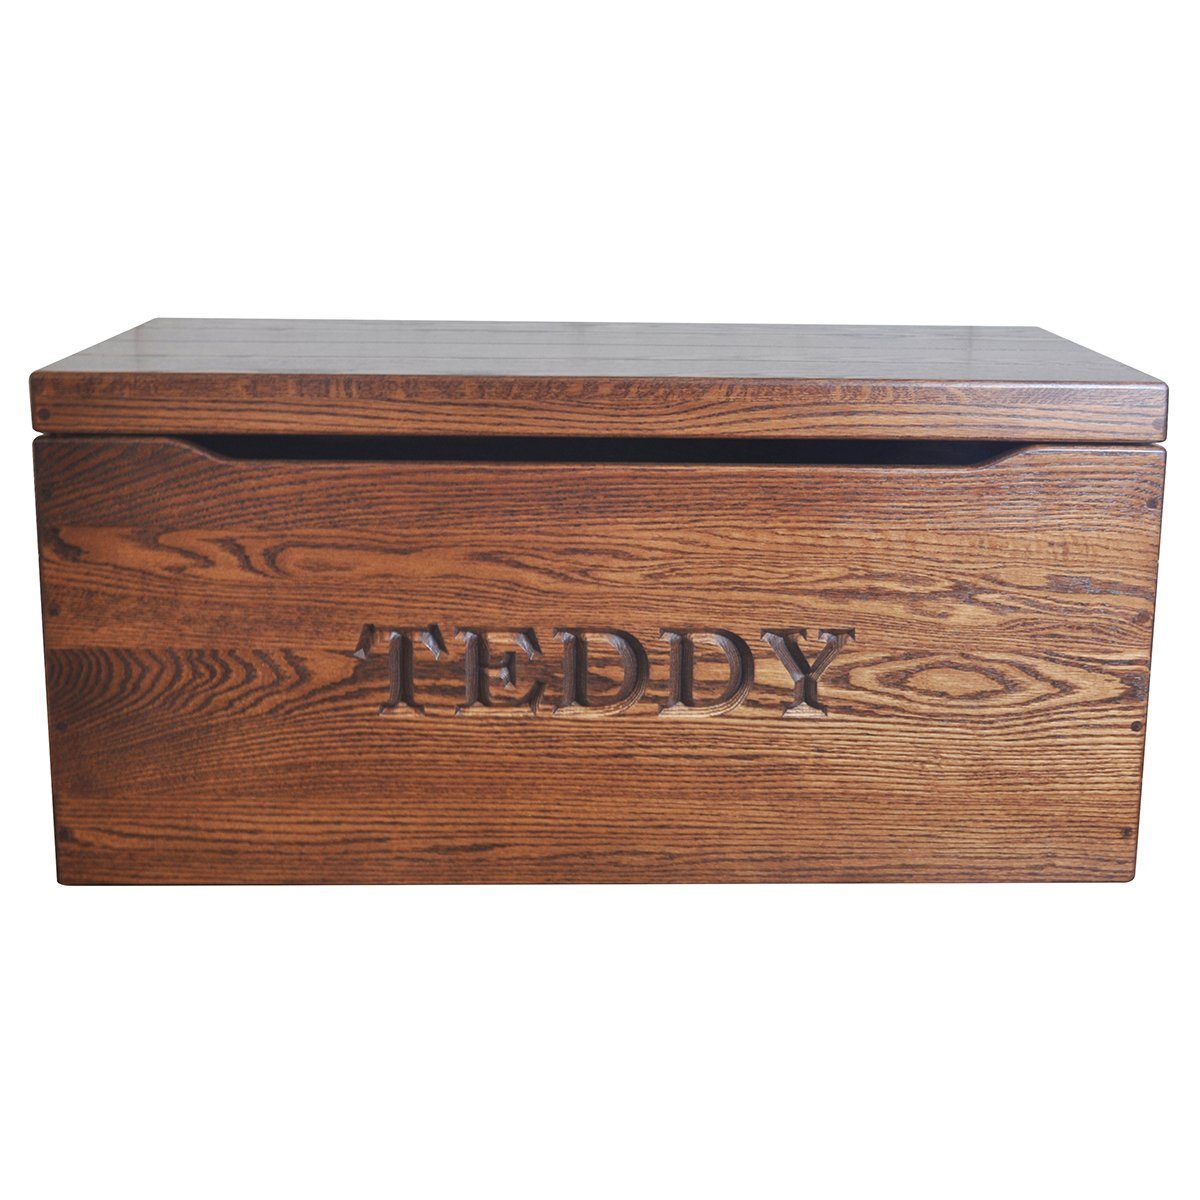 Engraved toy Chest Example